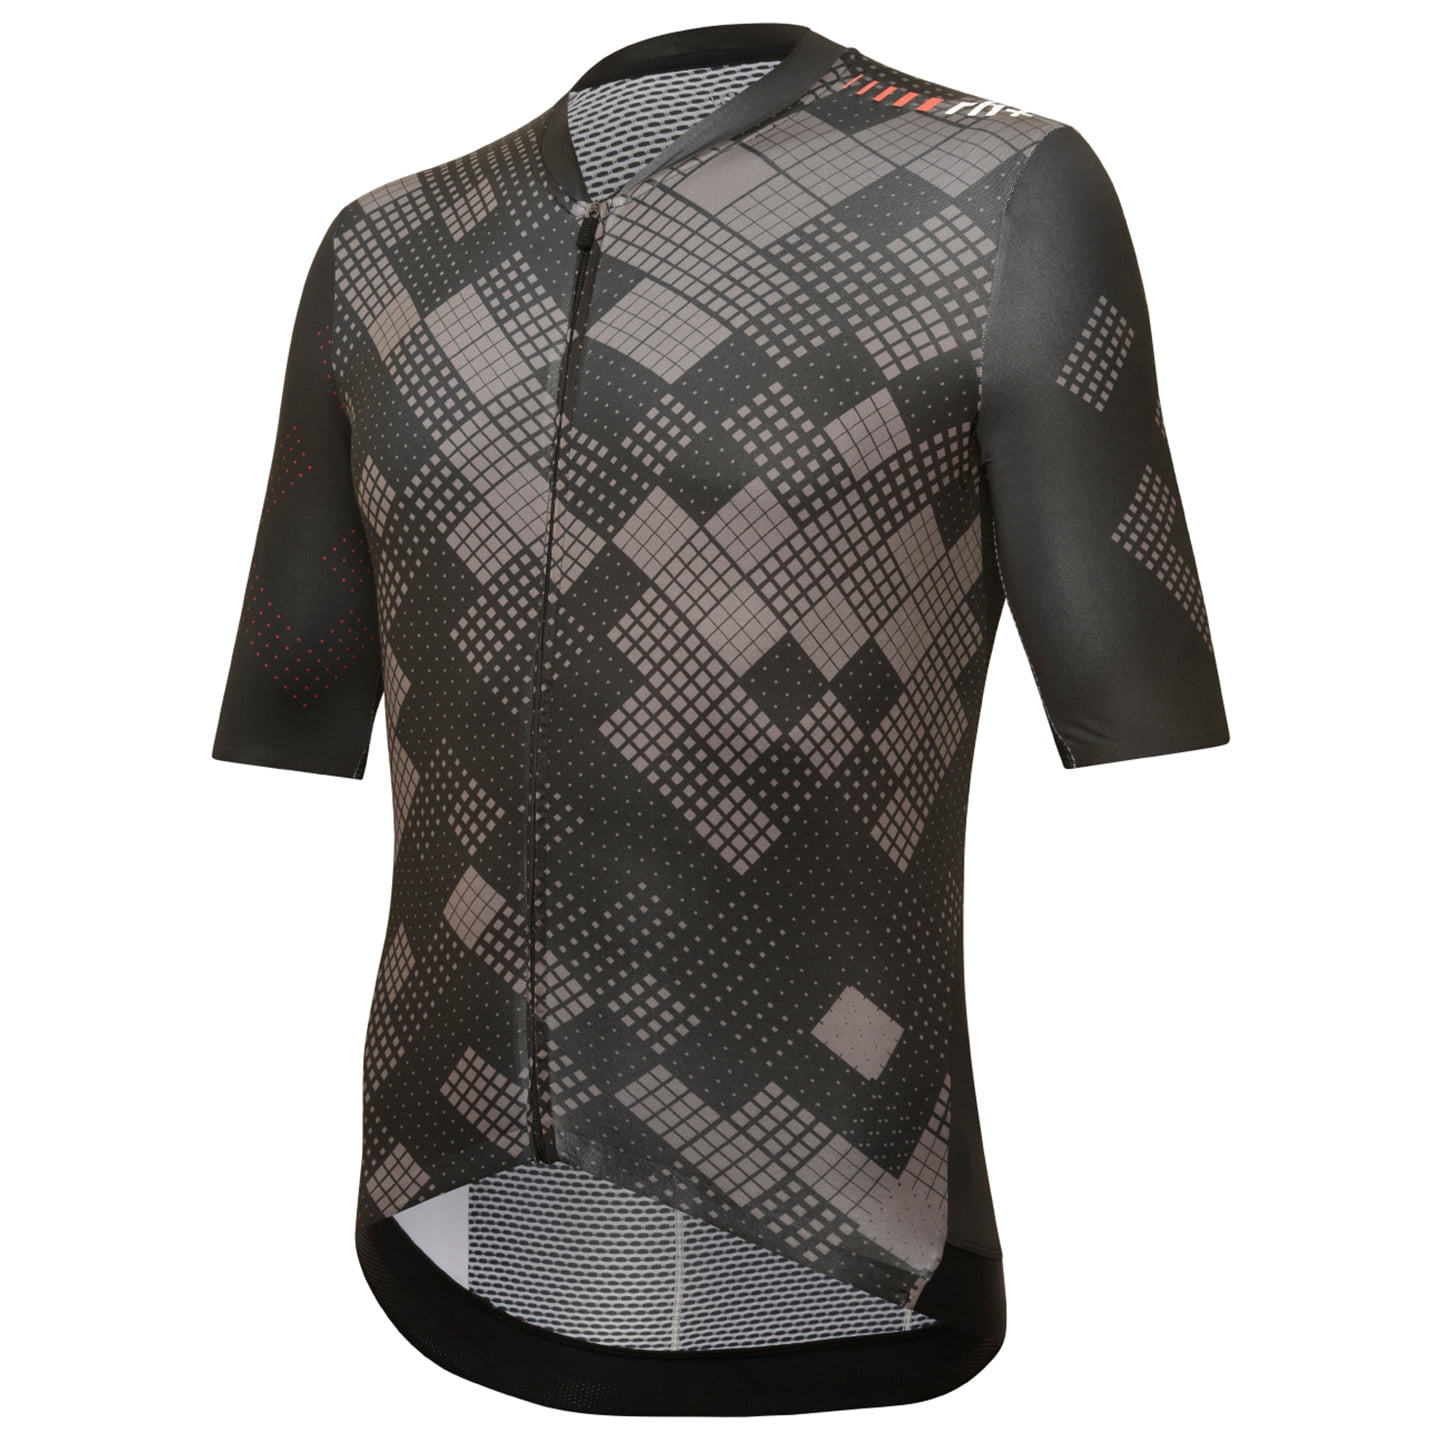 rh+ Diamond Short Sleeve Jersey Short Sleeve Jersey, for men, size XL, Cycling jersey, Cycle clothing